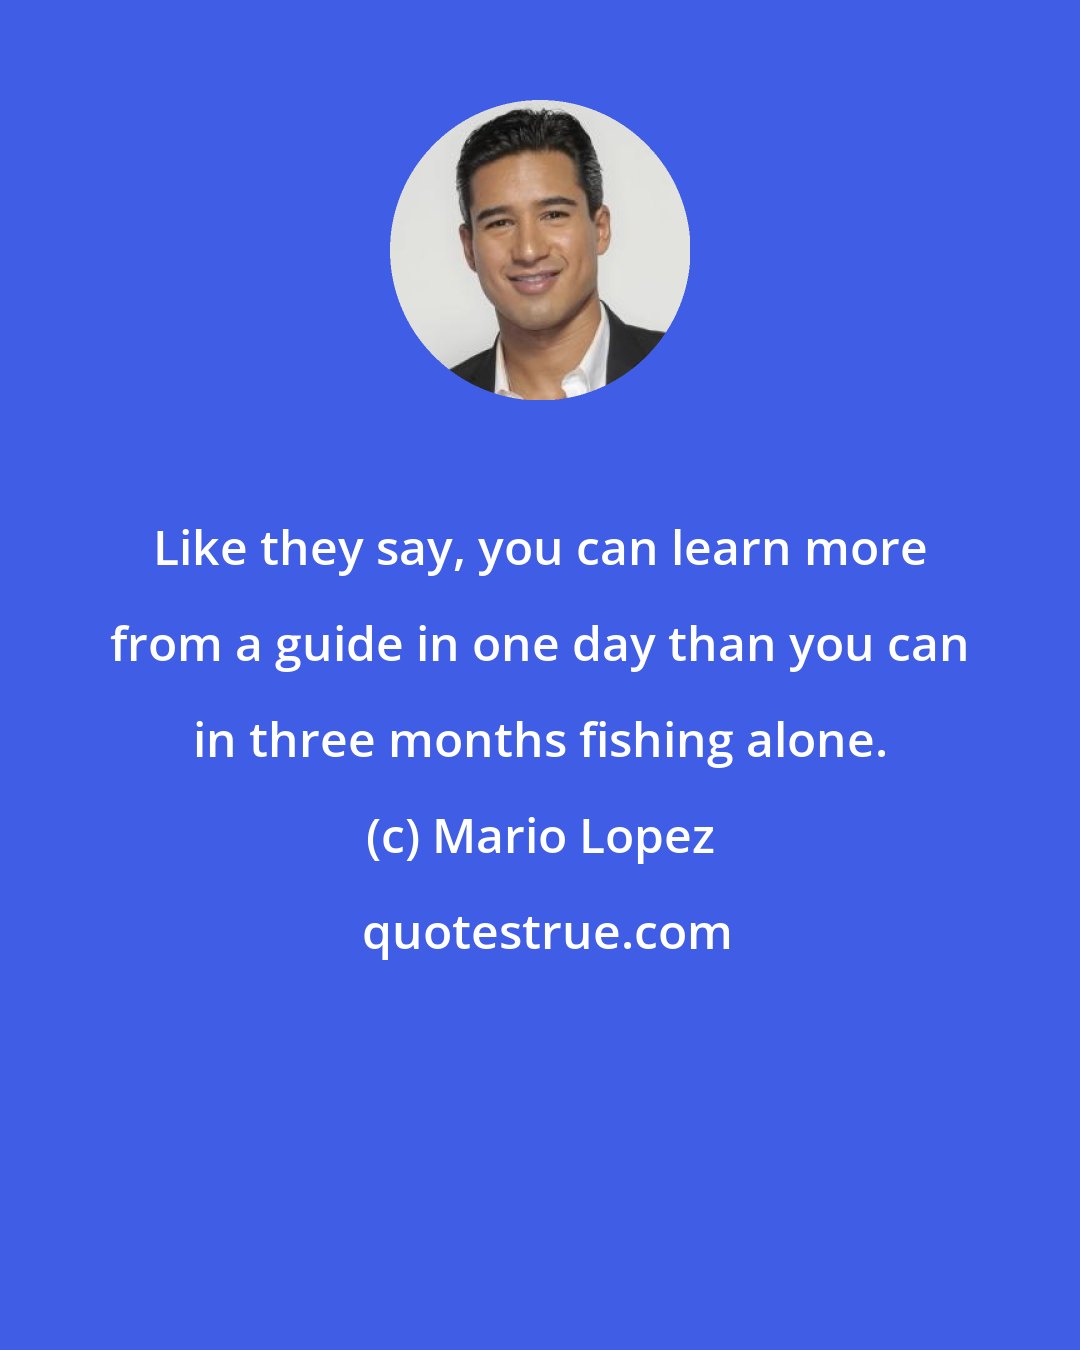 Mario Lopez: Like they say, you can learn more from a guide in one day than you can in three months fishing alone.